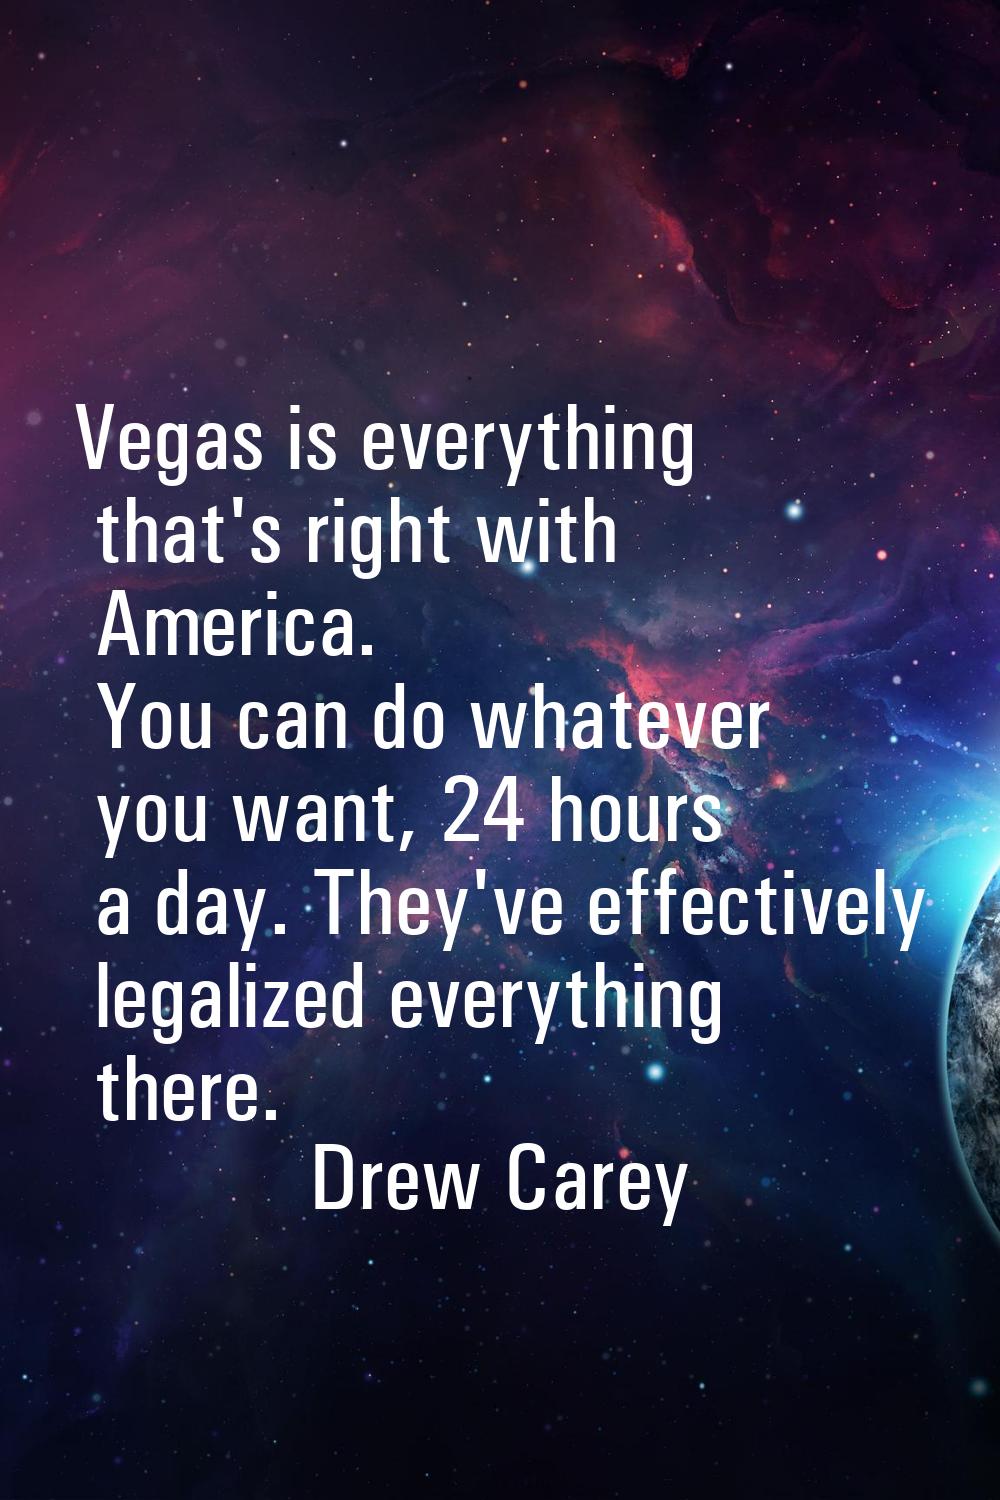 Vegas is everything that's right with America. You can do whatever you want, 24 hours a day. They'v